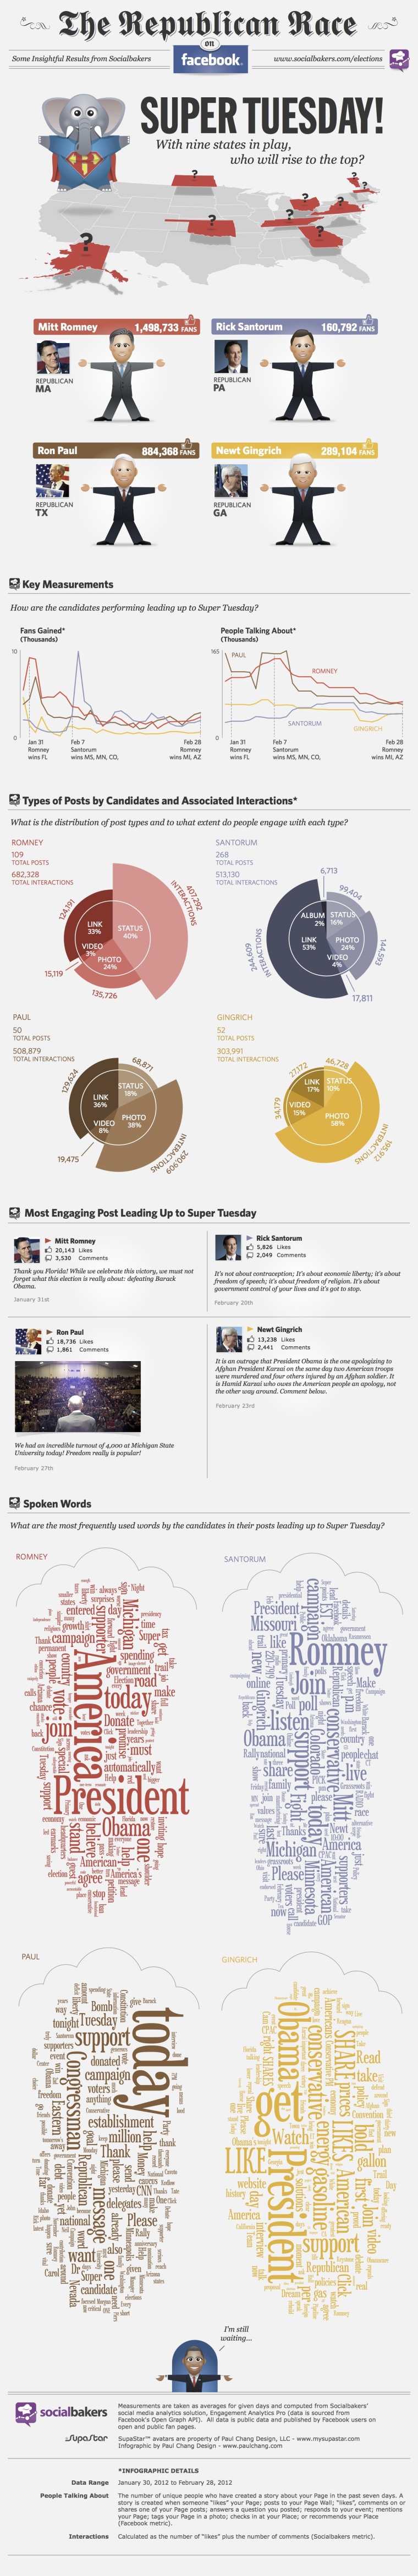 Socialbakers' Super Tuesday infographic